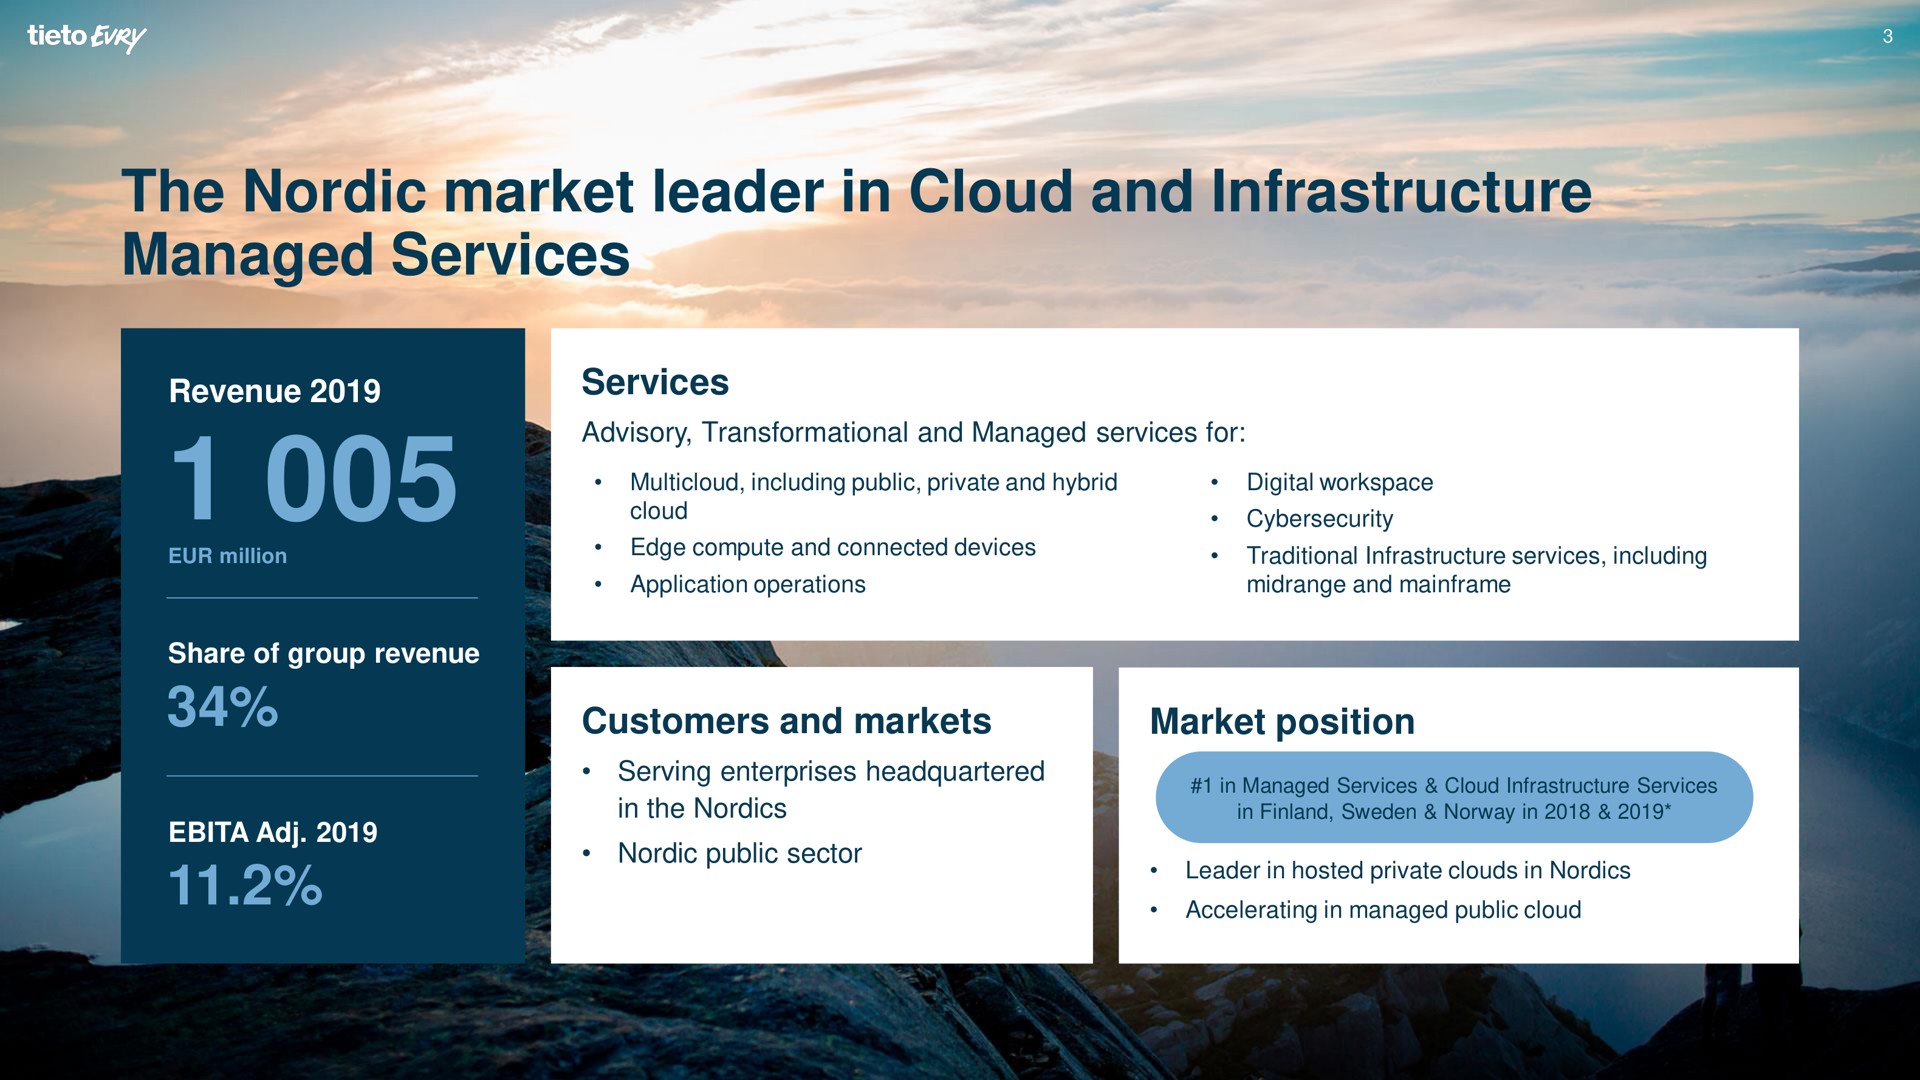 the market leader in cloud and infrastructure managed services | Tietoevry